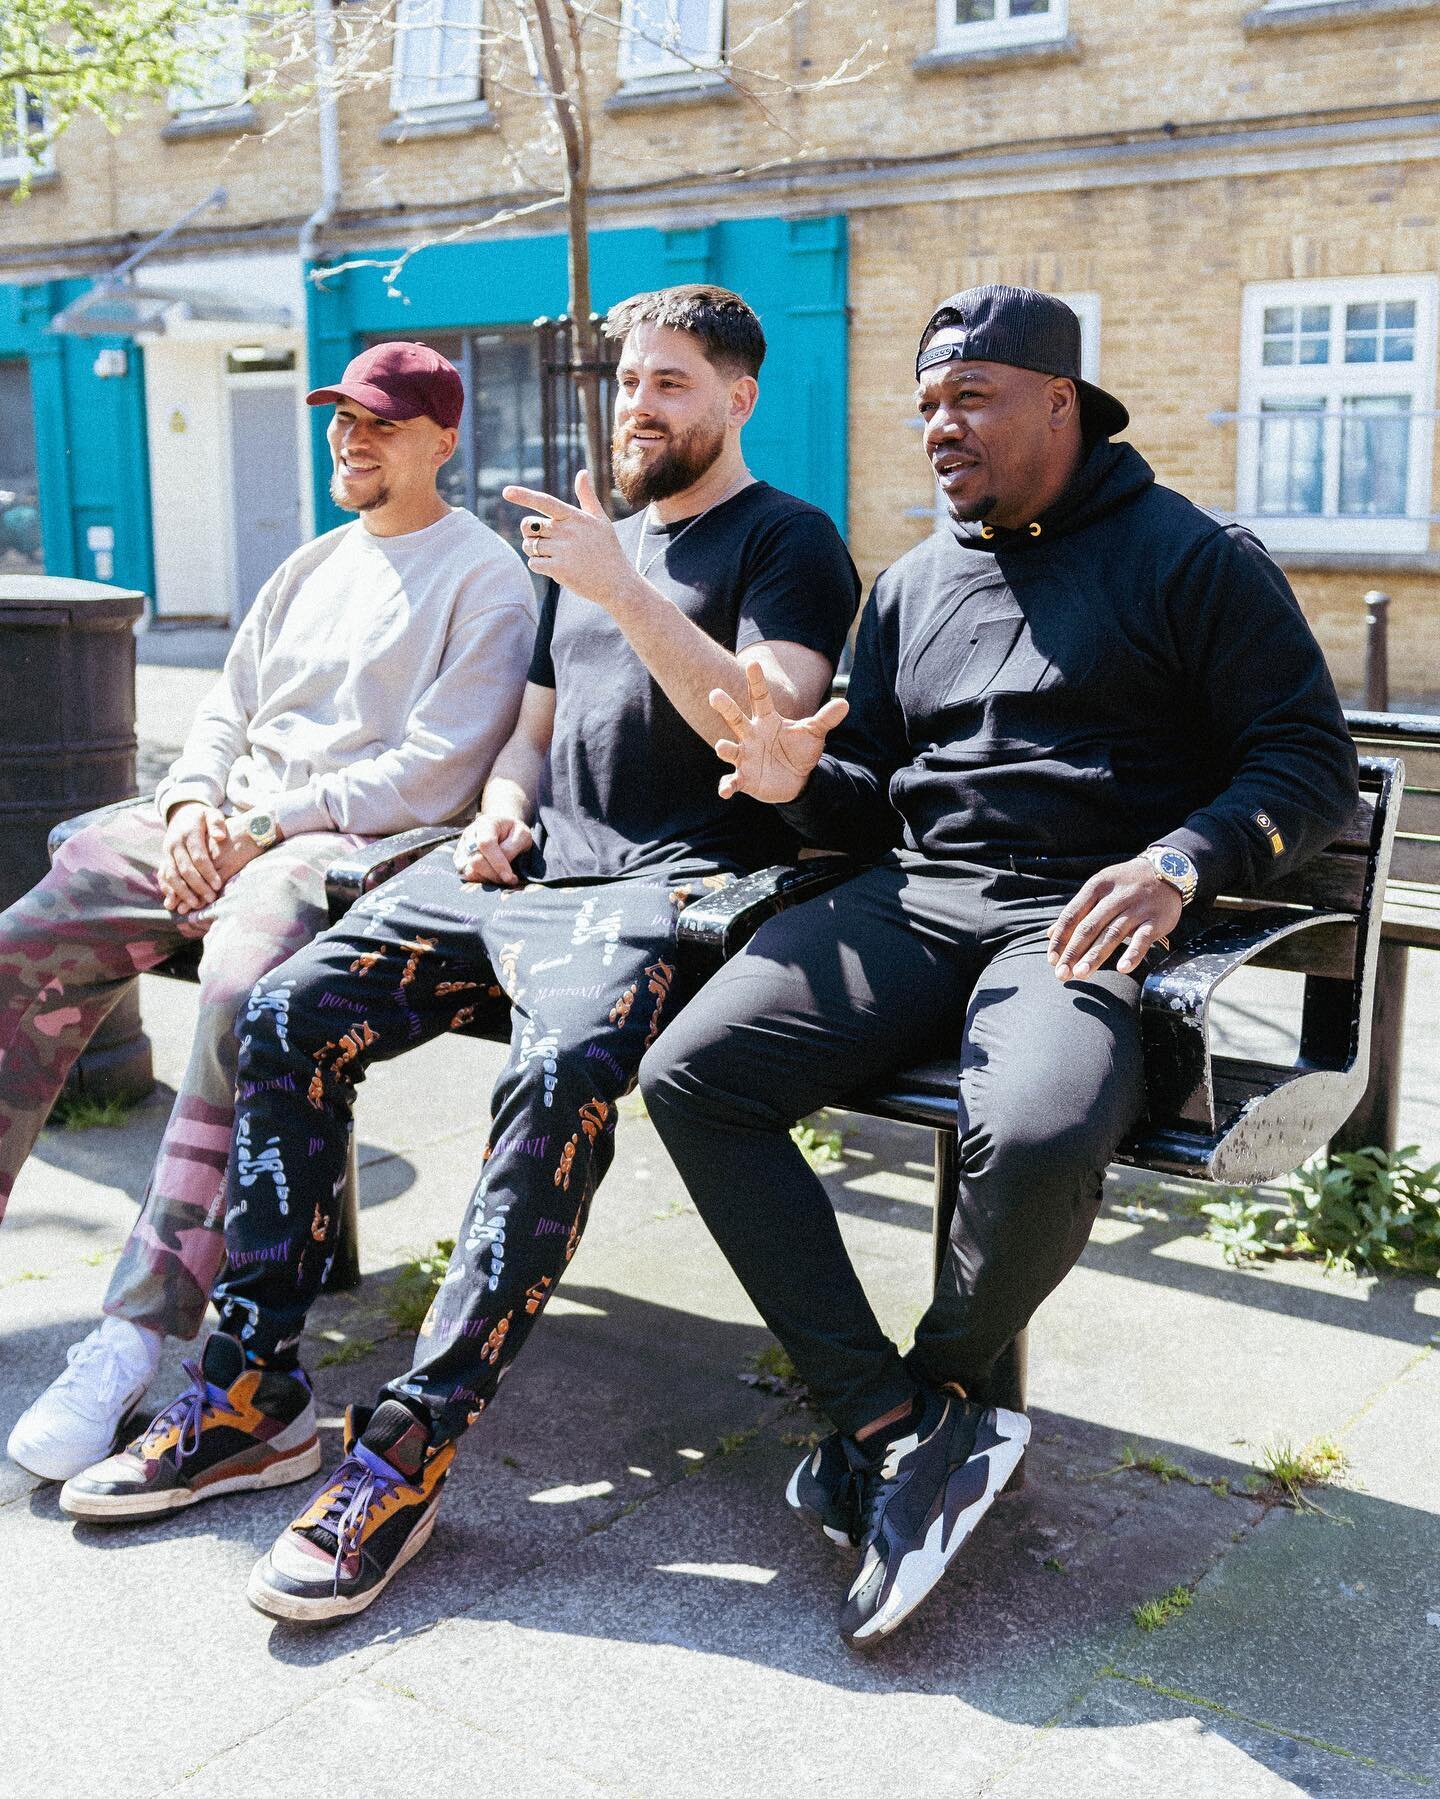 Pleasure to shoot BTS content with @rudimentaluk &amp; @vibechemistrydnb 

collab with @evpro_